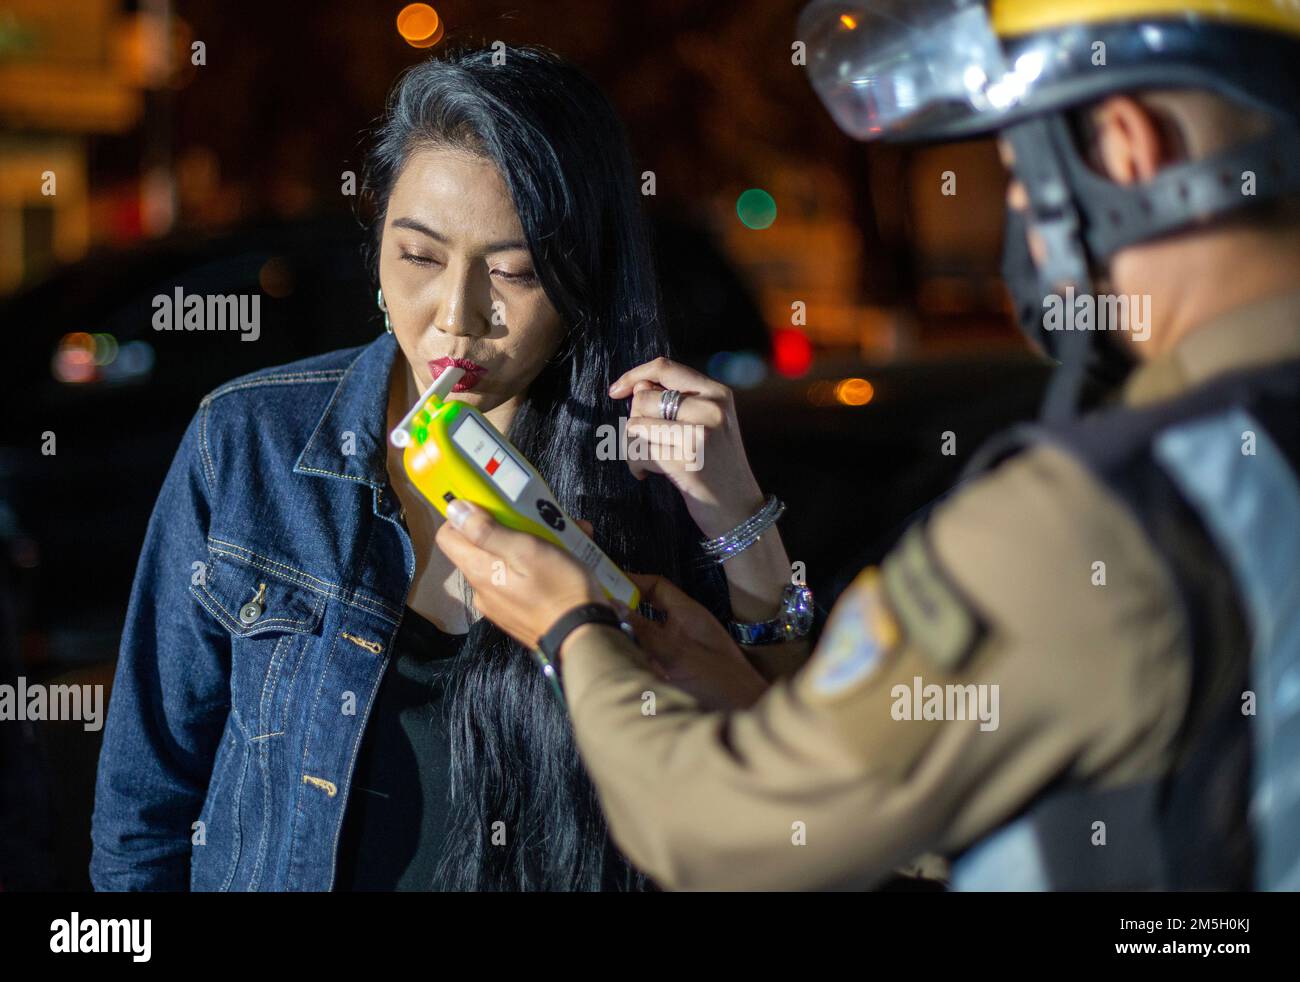 A thai police officer takes a driver through an alcohol tests using a breathalyzer at Check point in Chiang Mai. The Center for Prevention and Reduction of Road Accidents has been established during the New Year's Festival 2023, the 7-day intensive control period from 29 December 2022 to 4 January 2023. More than 50,000 police officers are to set up checkpoints to facilitate traffic laws and take care of the safety of people. They will work throughout the festival without holidays, focusing on 4 charges according to government policy: driving while intoxicated, driving too fast, and not wearin Stock Photo